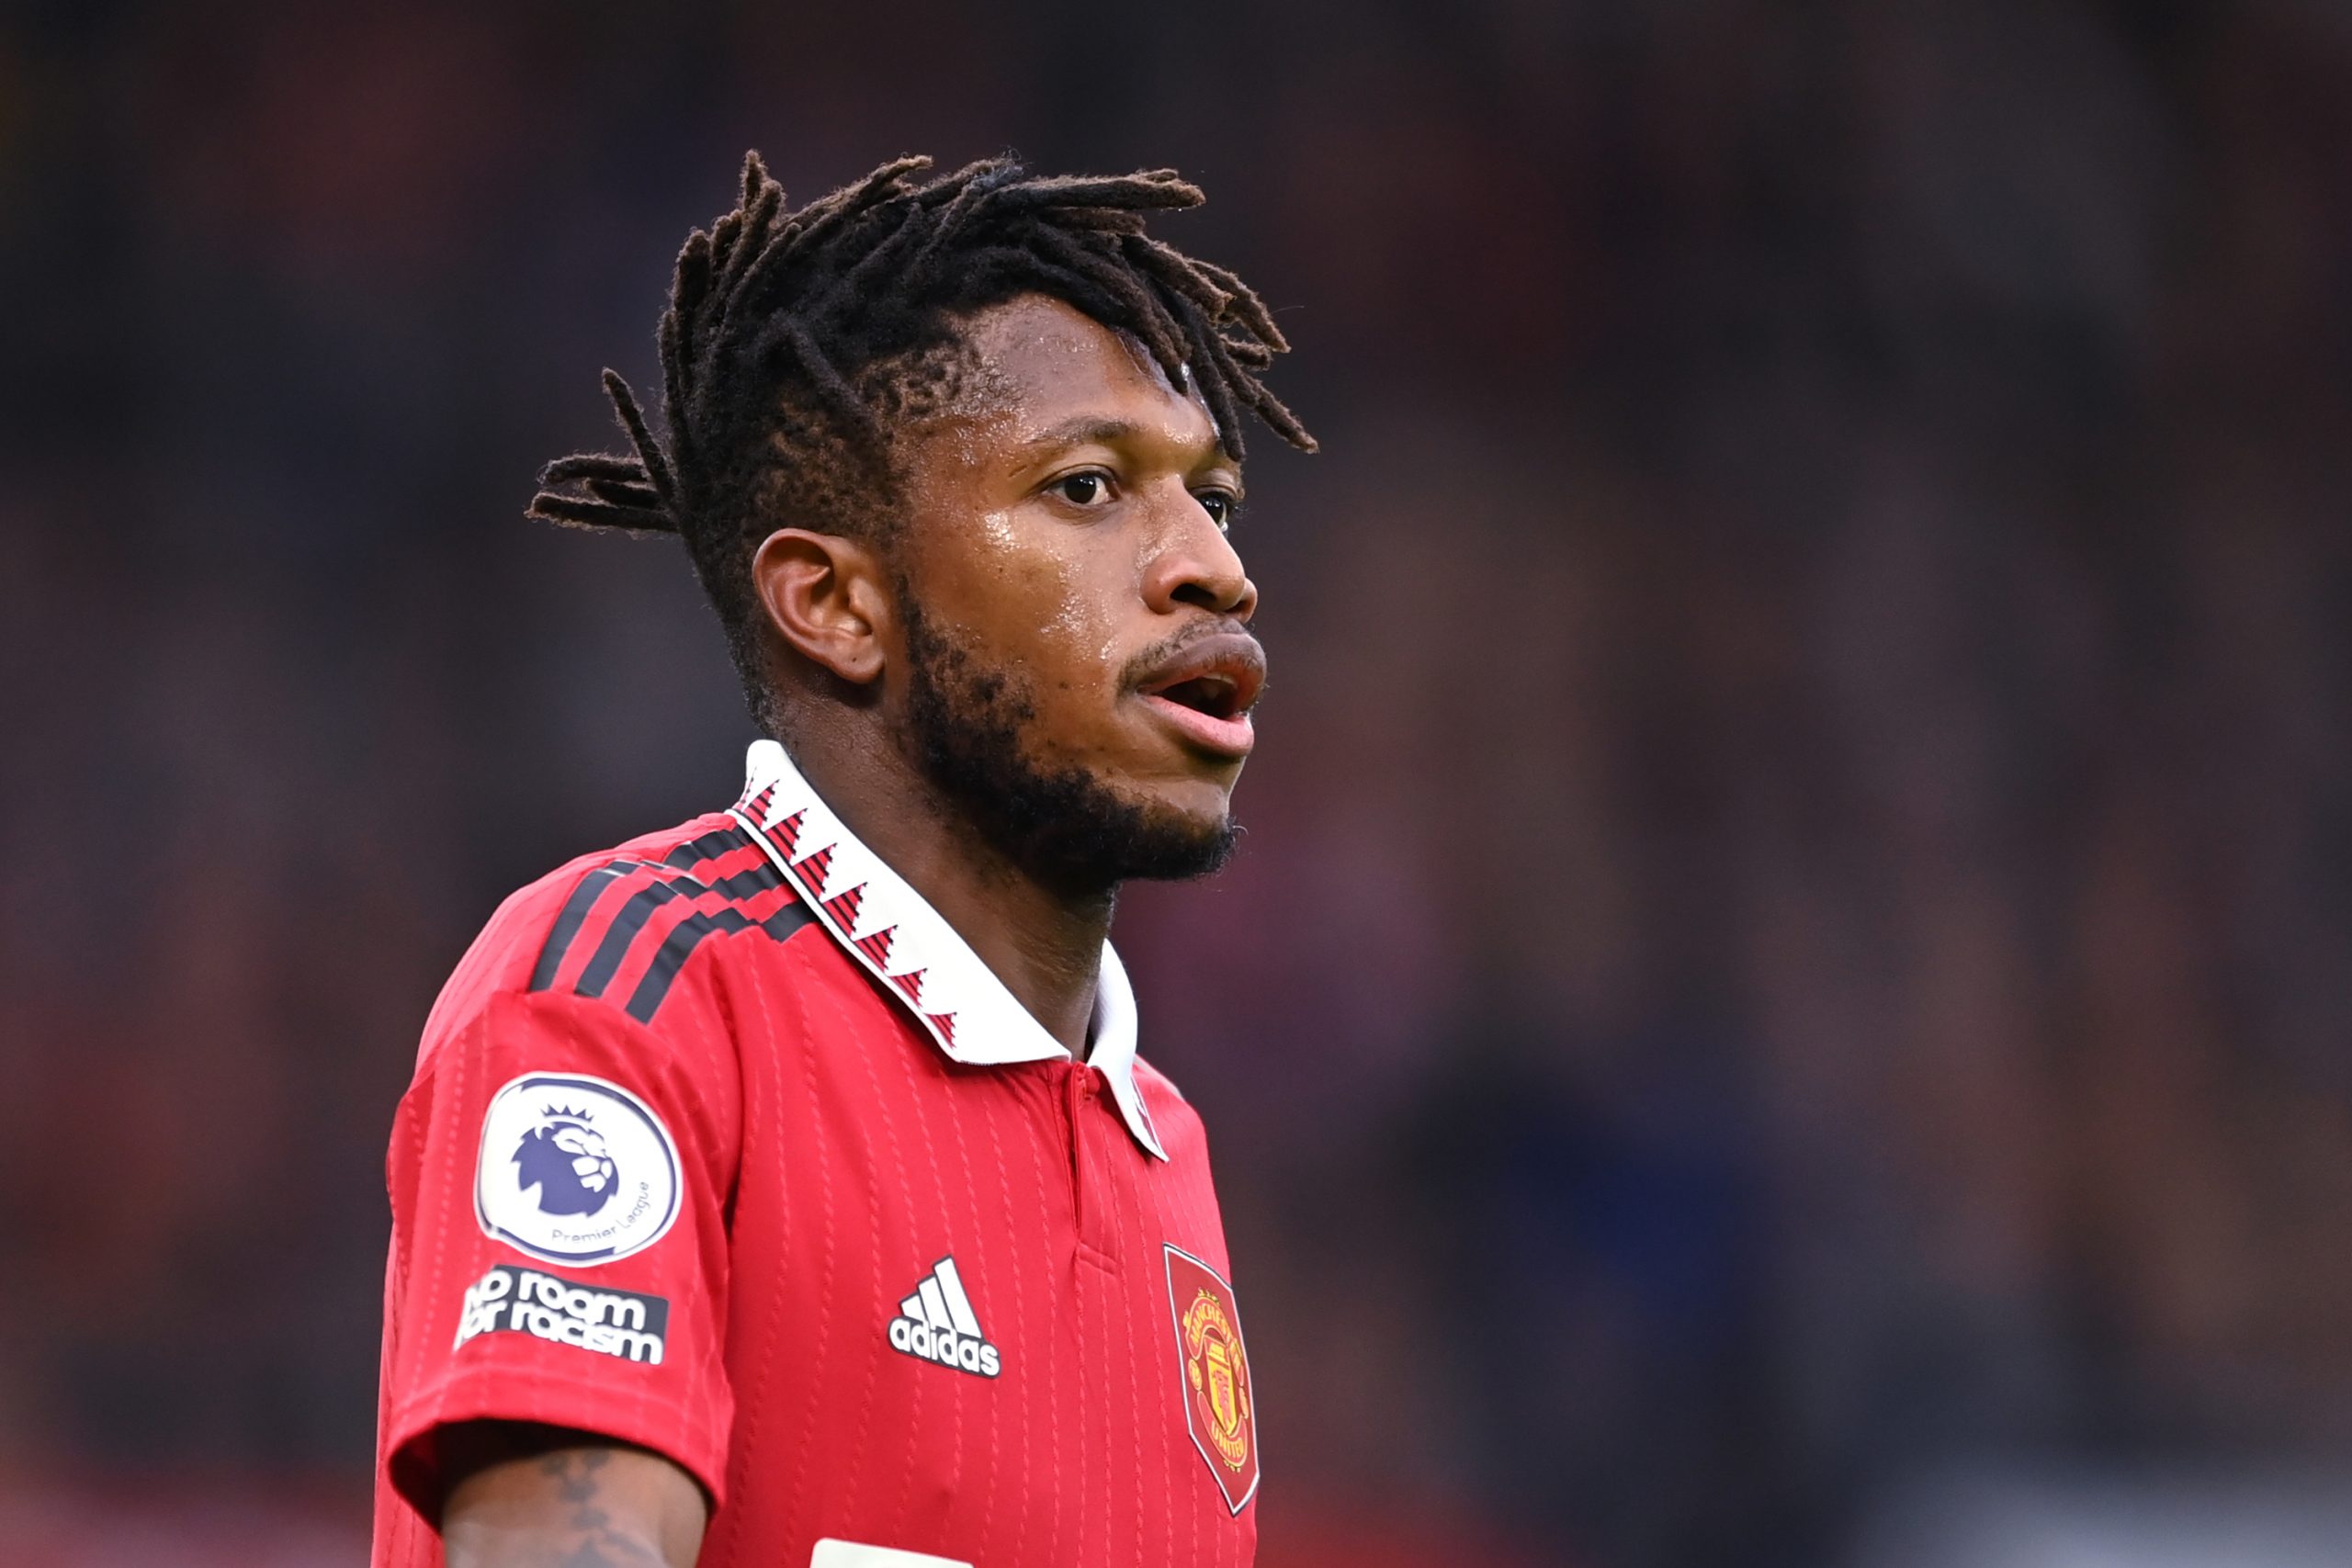 Fred of Manchester United looks on during the Premier League match between Manchester United and Crystal Palace at Old Trafford on February 04, 2023 in Manchester, England.